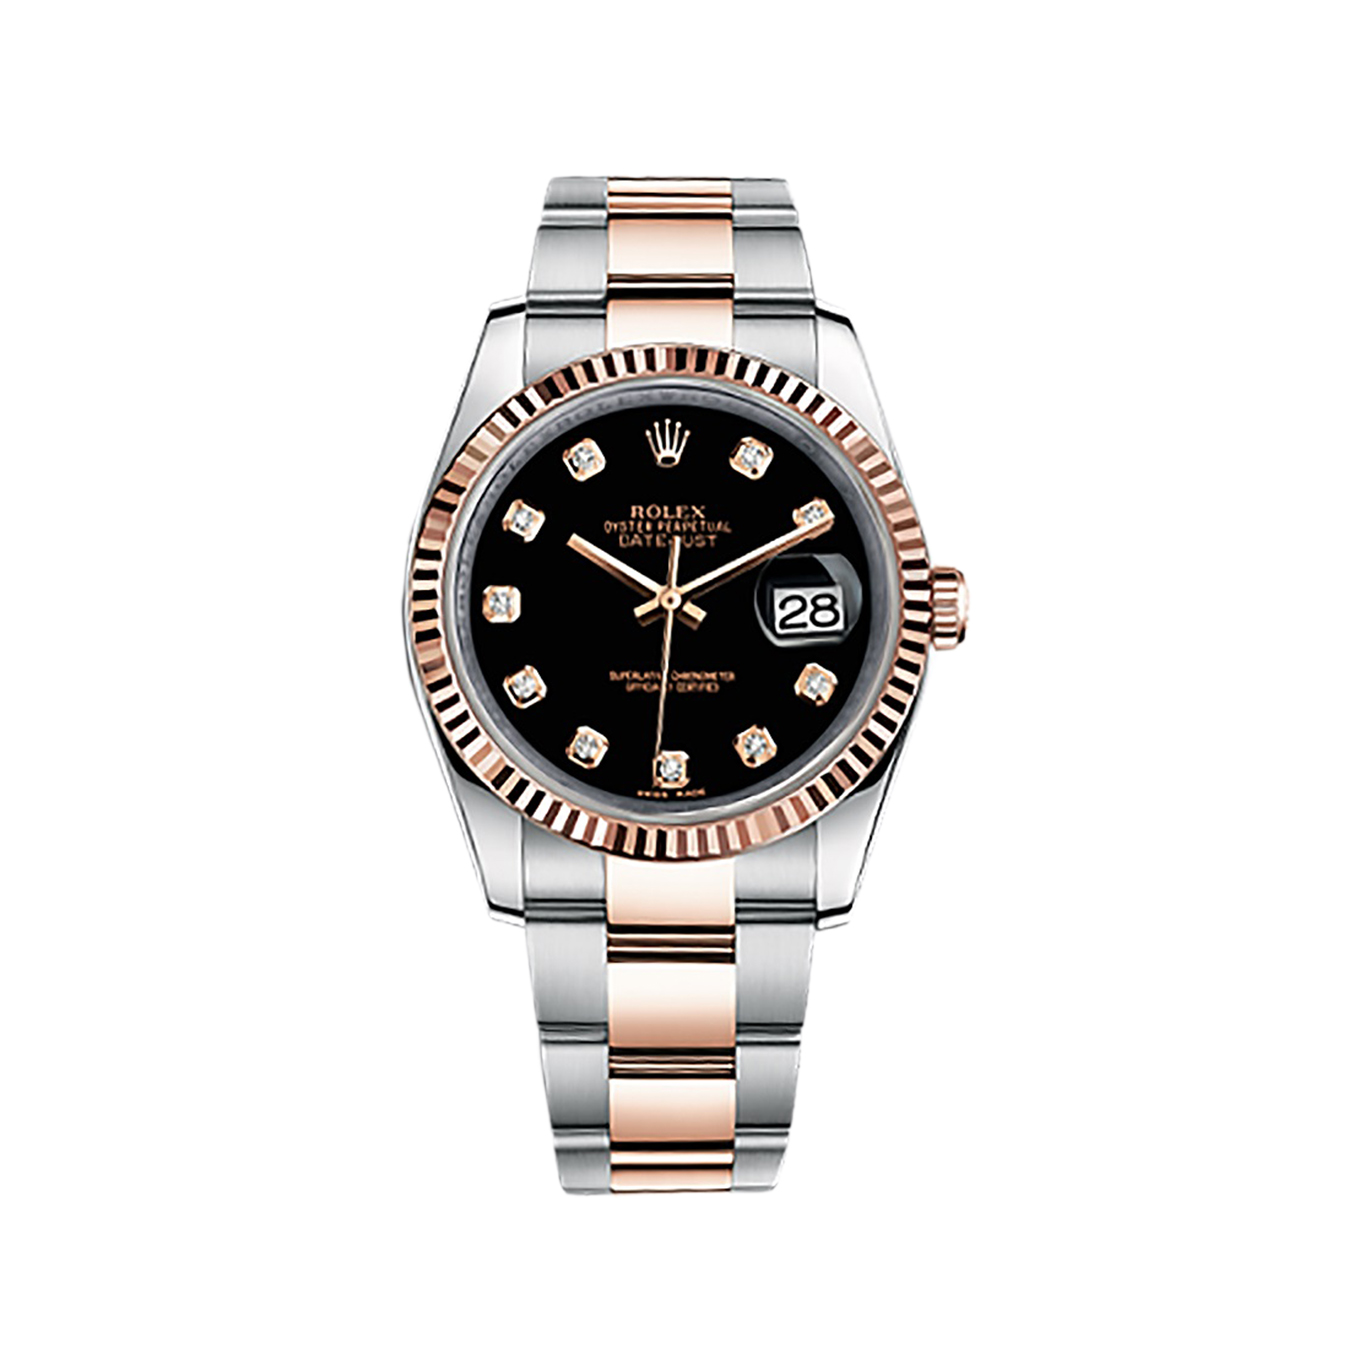 Datejust 36 116231 Rose Gold & Stainless Steel Watch (Black Set with Diamonds)